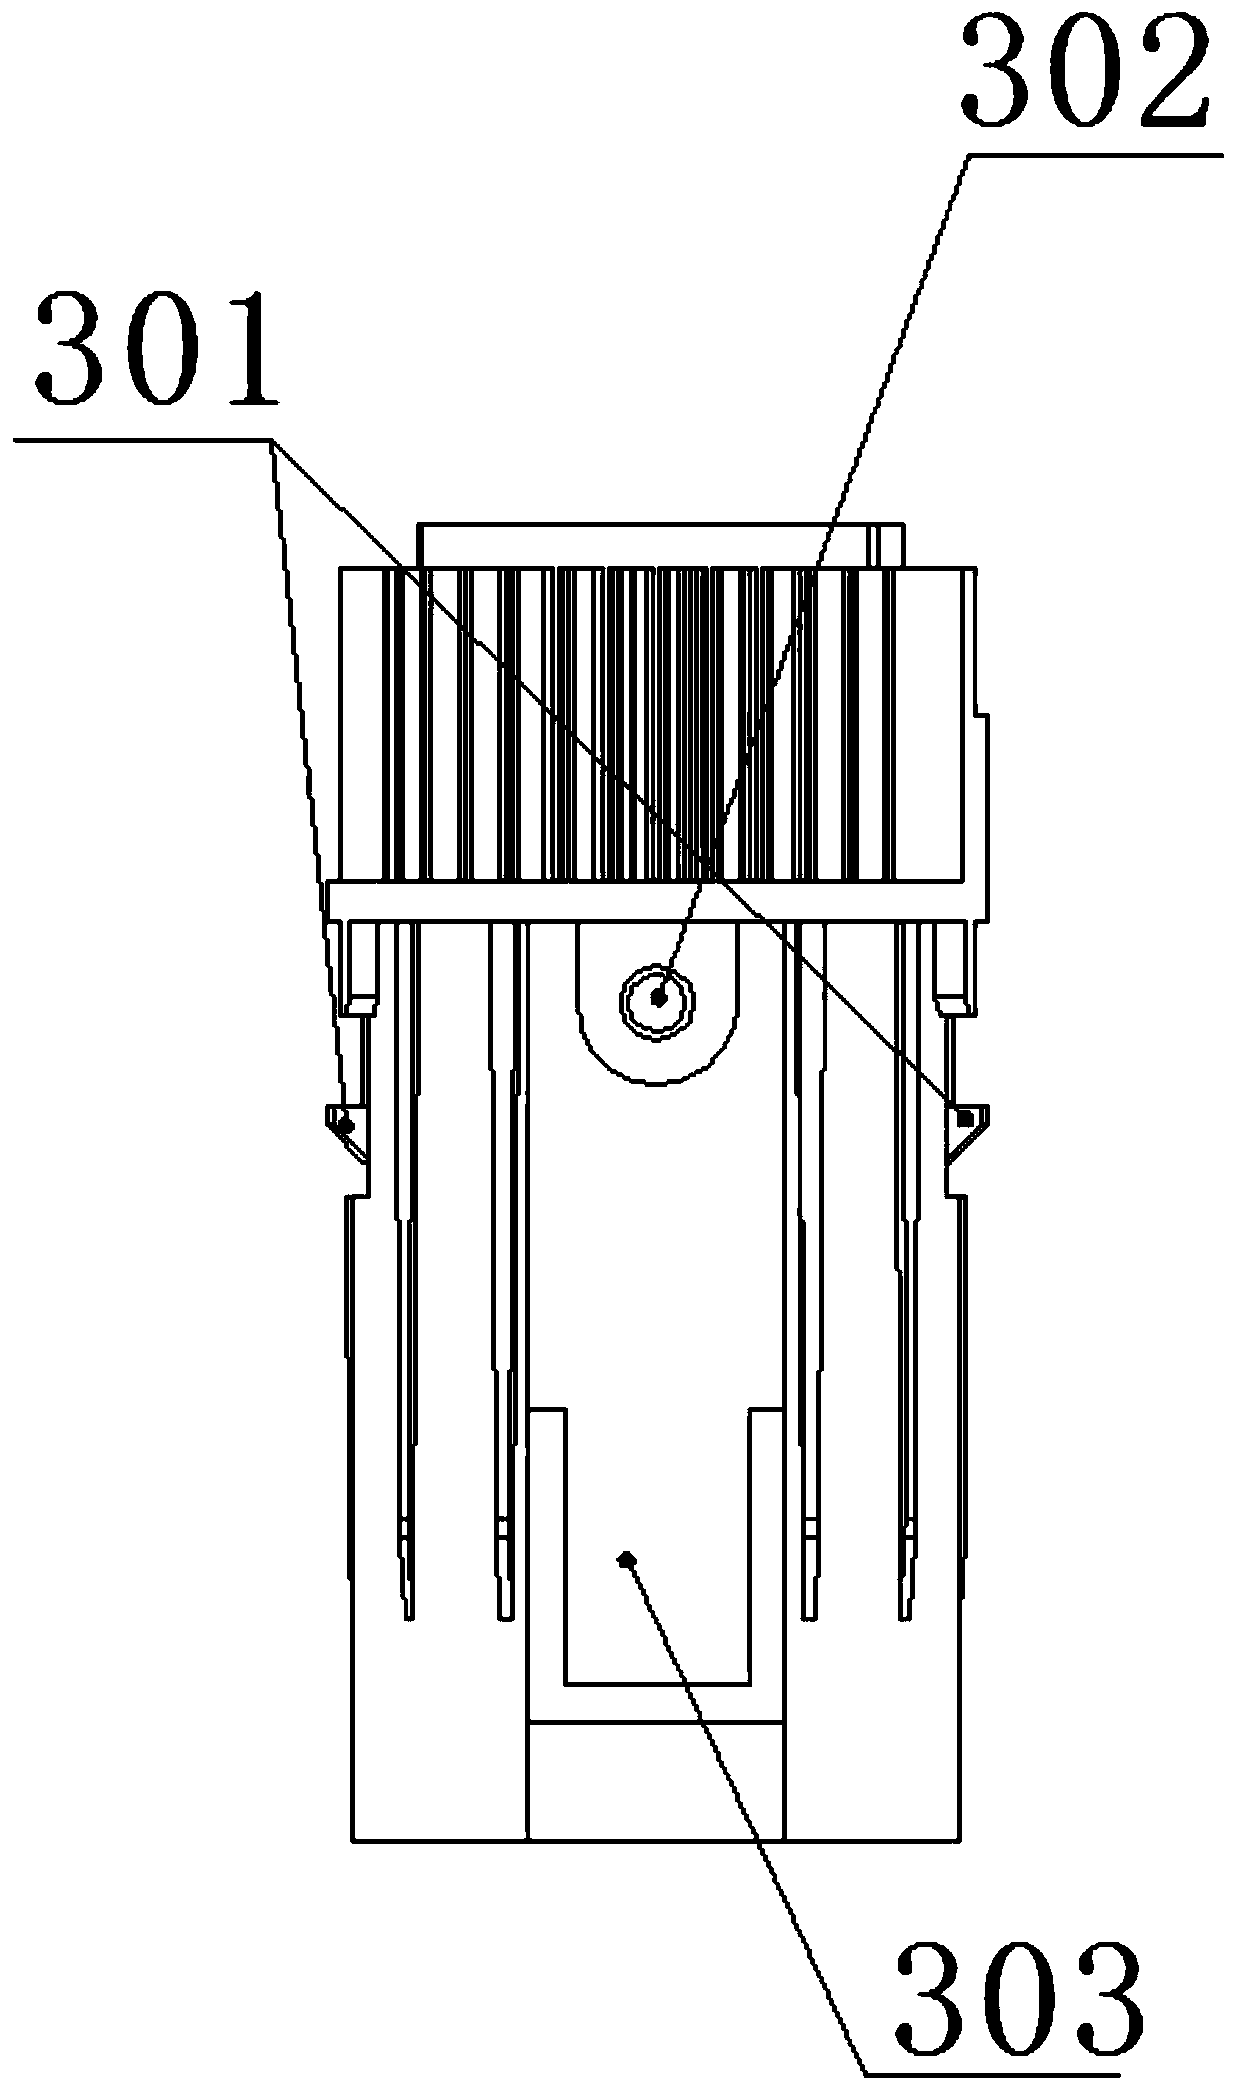 Driven gear assembly and fan